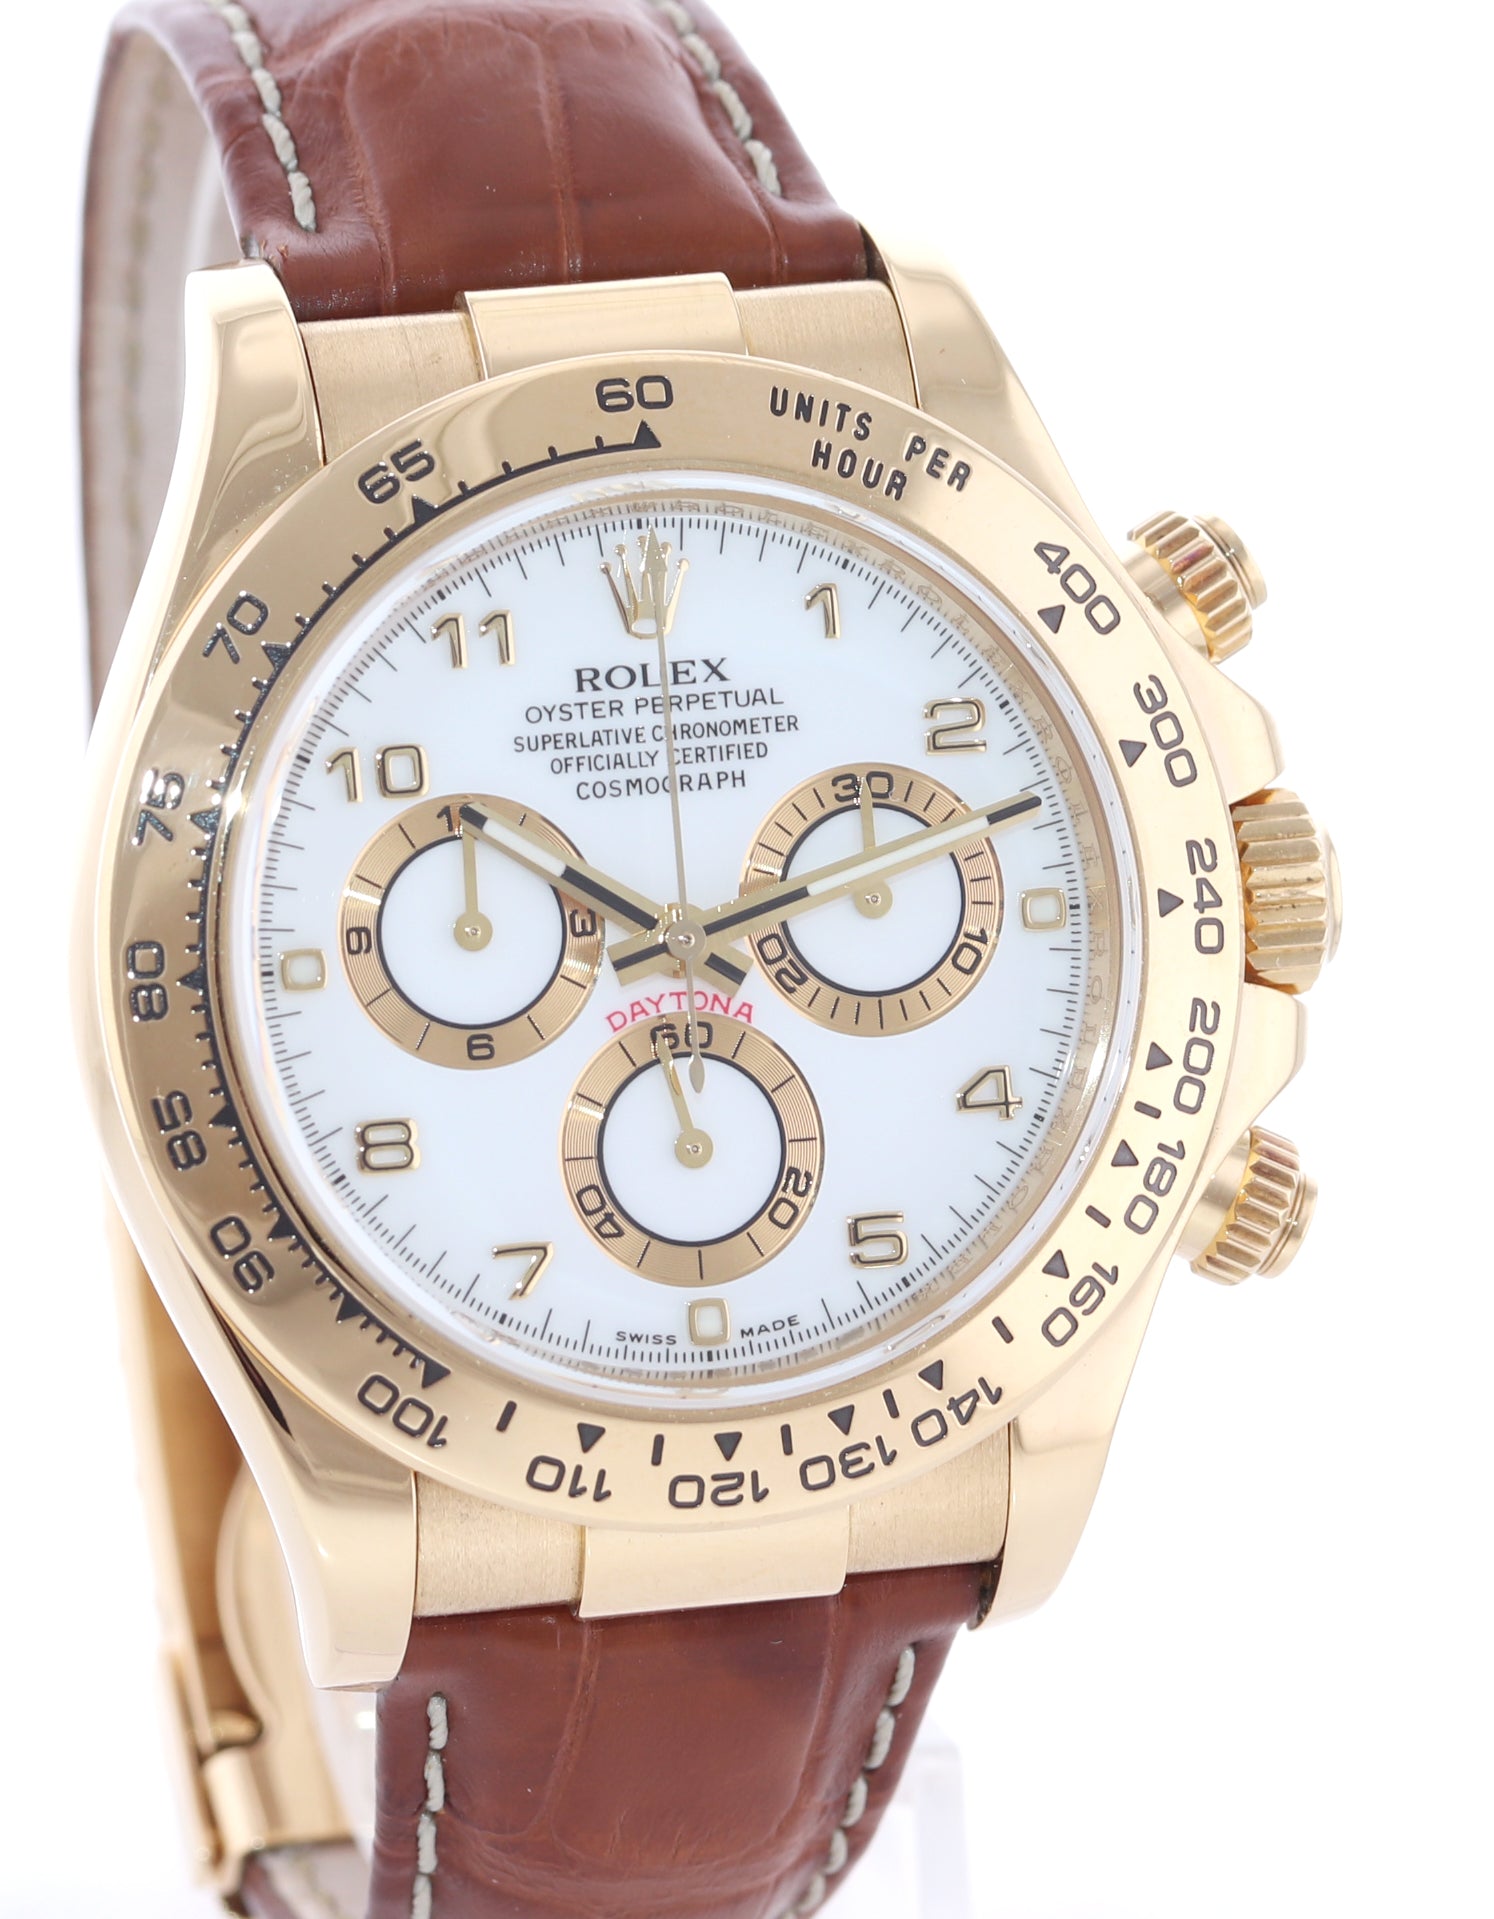 2008 PAPERS Rolex Daytona White Dial 116518 18k Yellow Gold Leather Watch Box